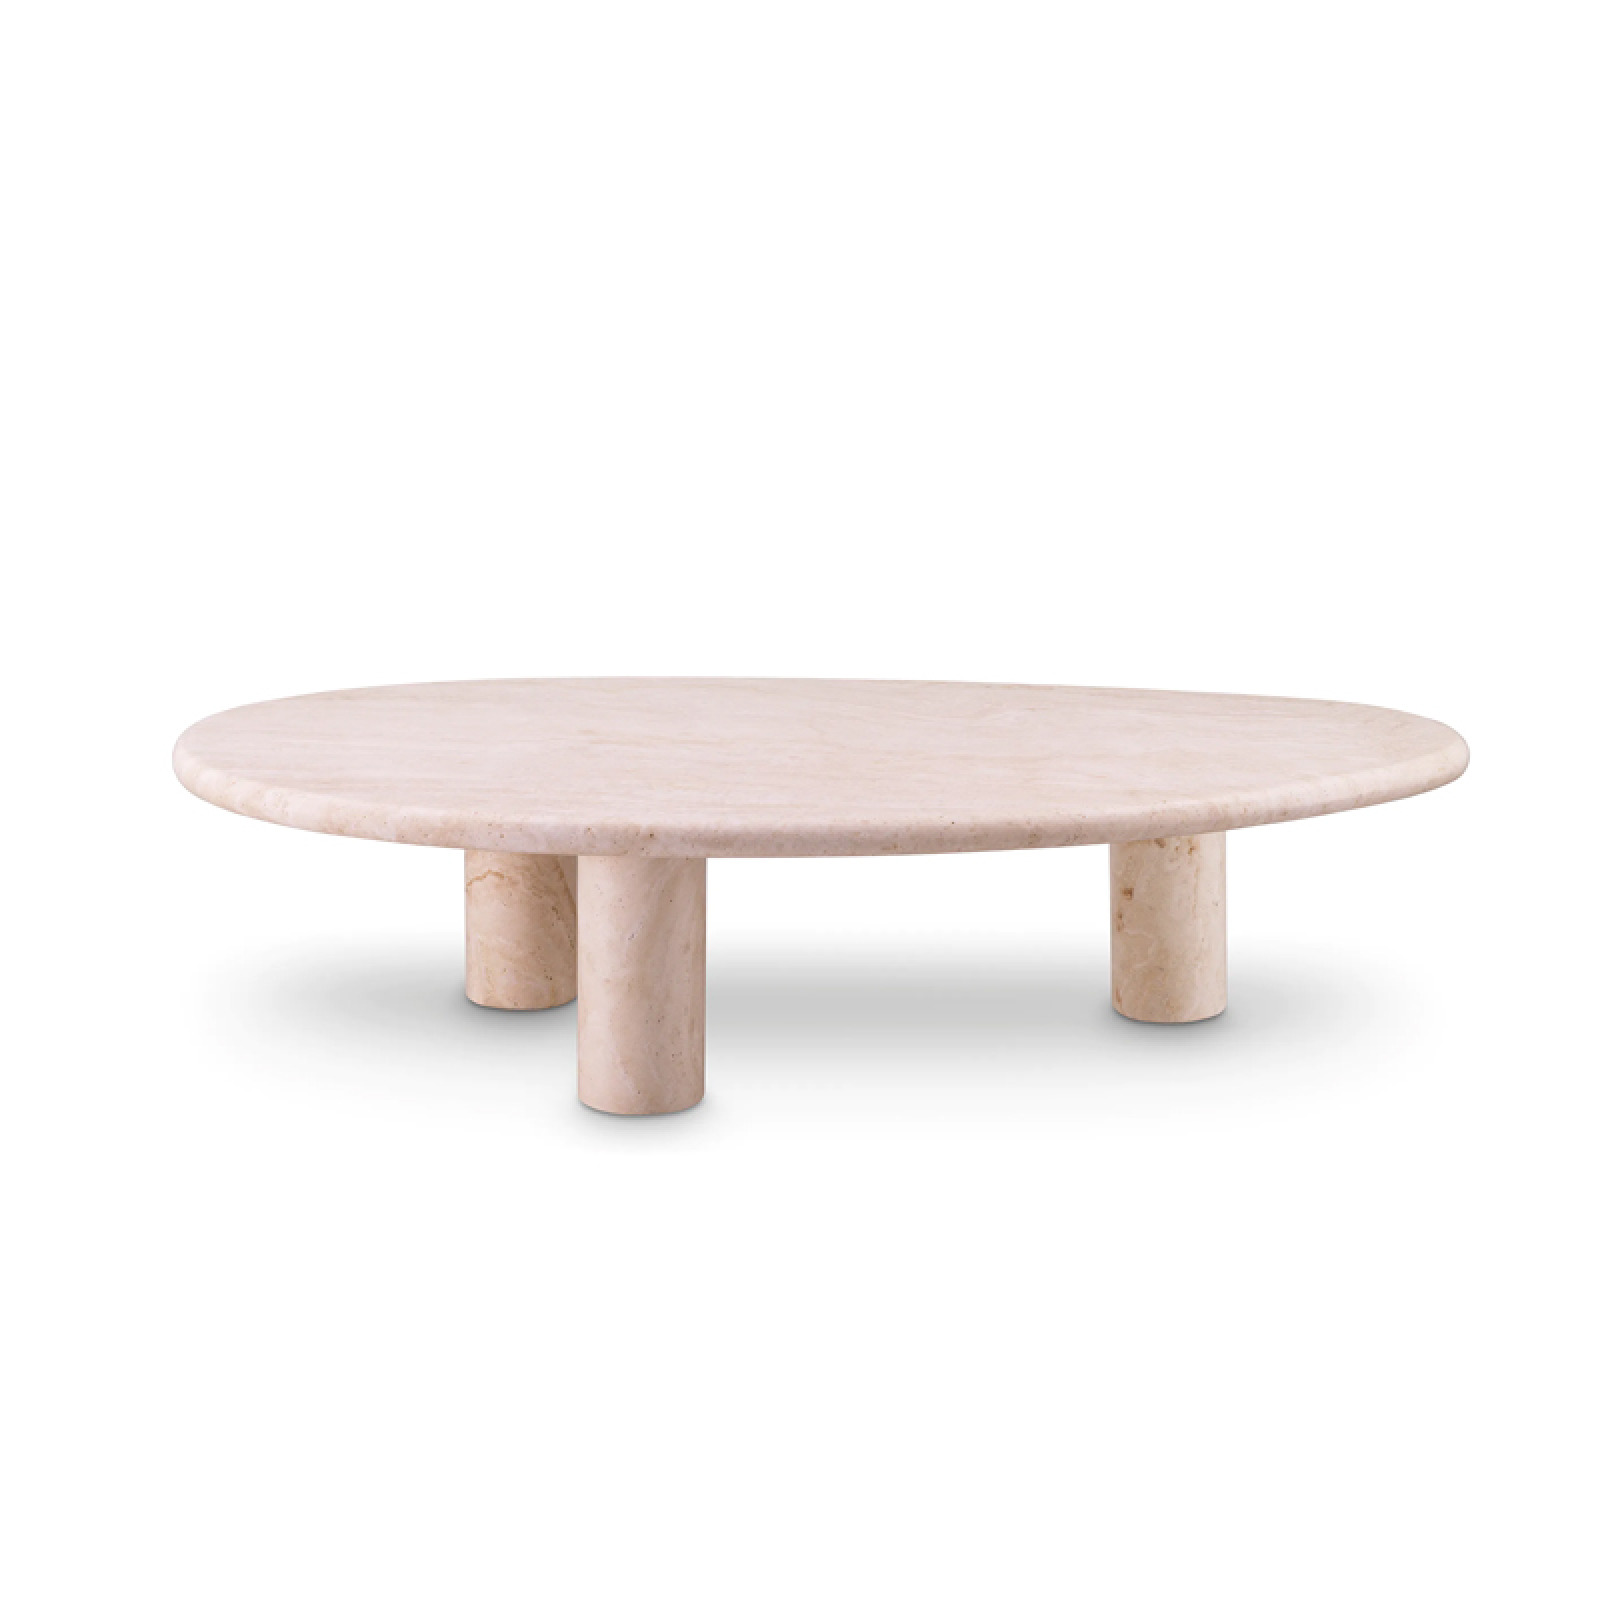 Prelude coffee table